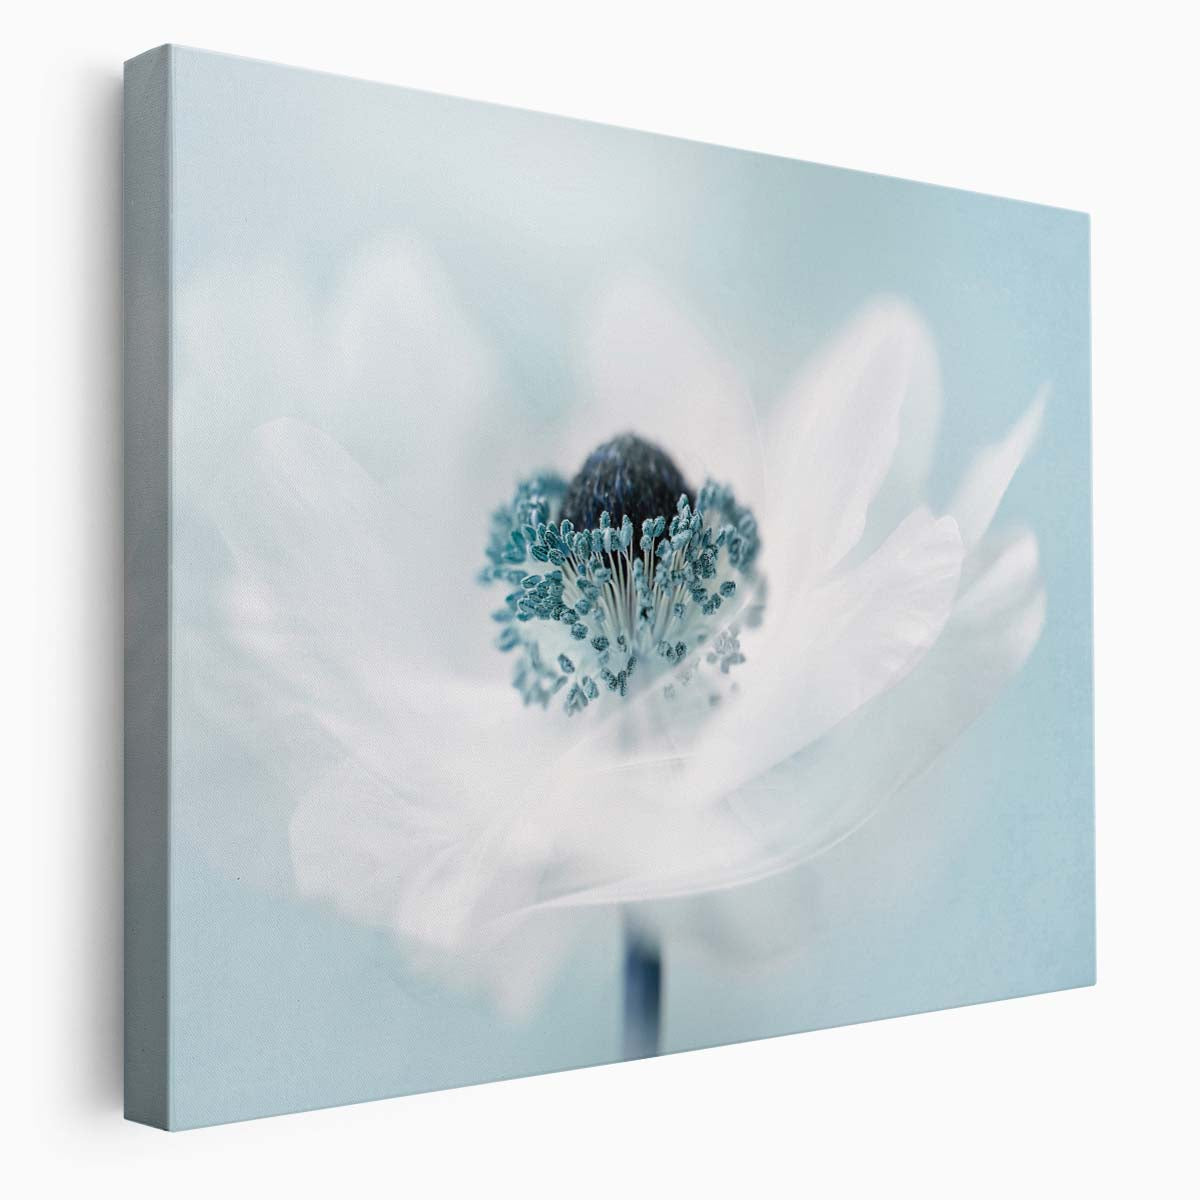 Turquoise Teal Floral Macro Abstraction Wall Art by Luxuriance Designs. Made in USA.